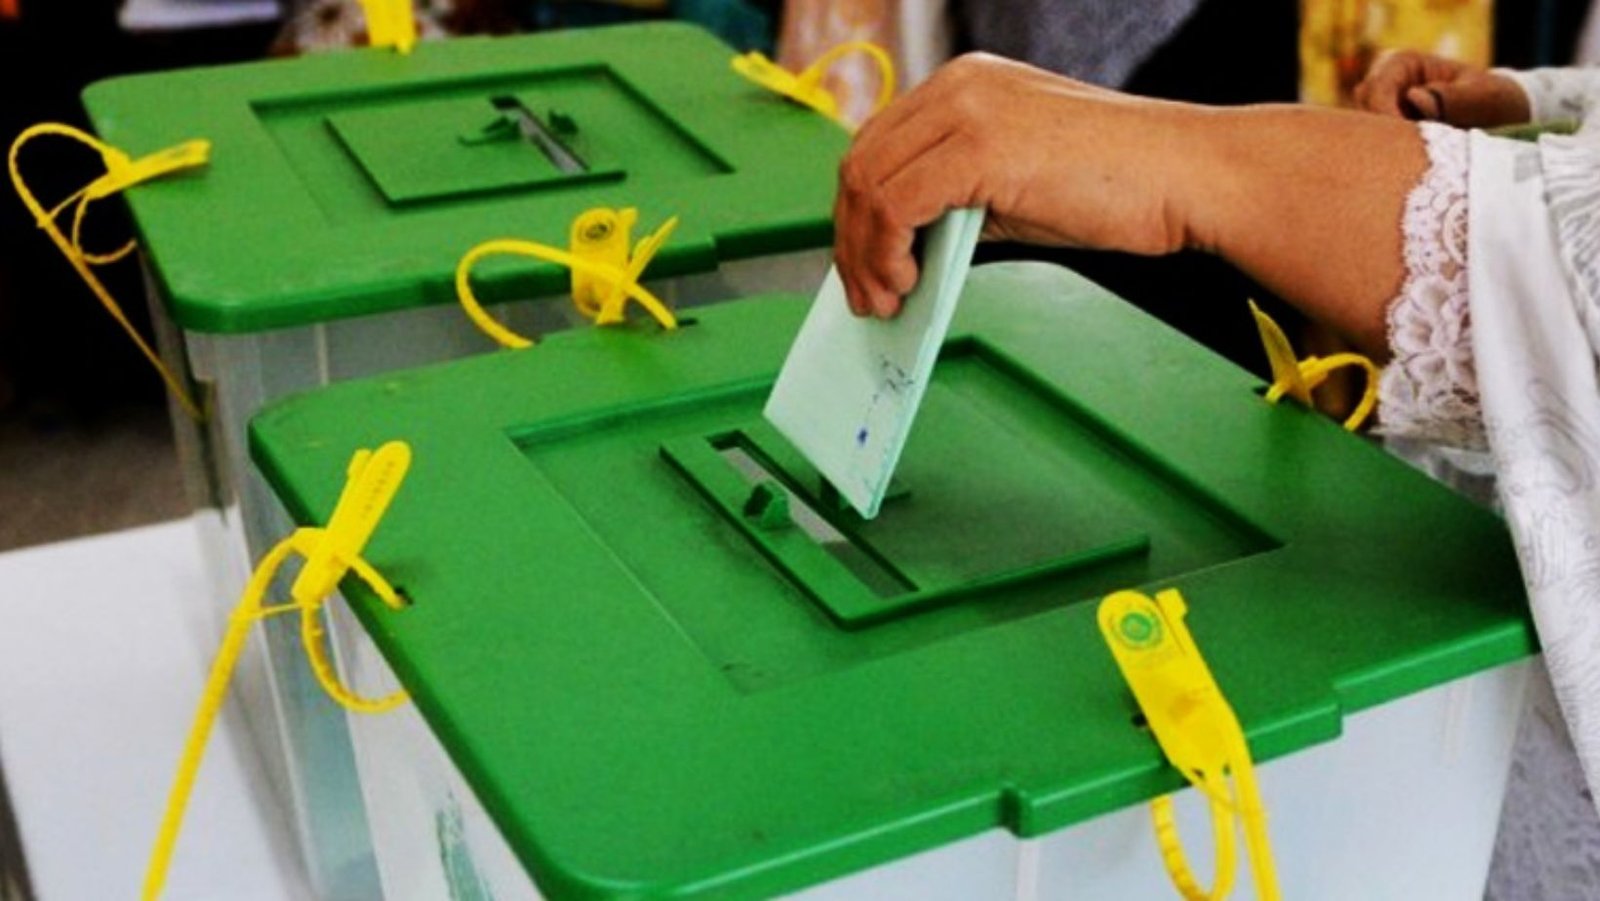 Sindh local government elections have started polling